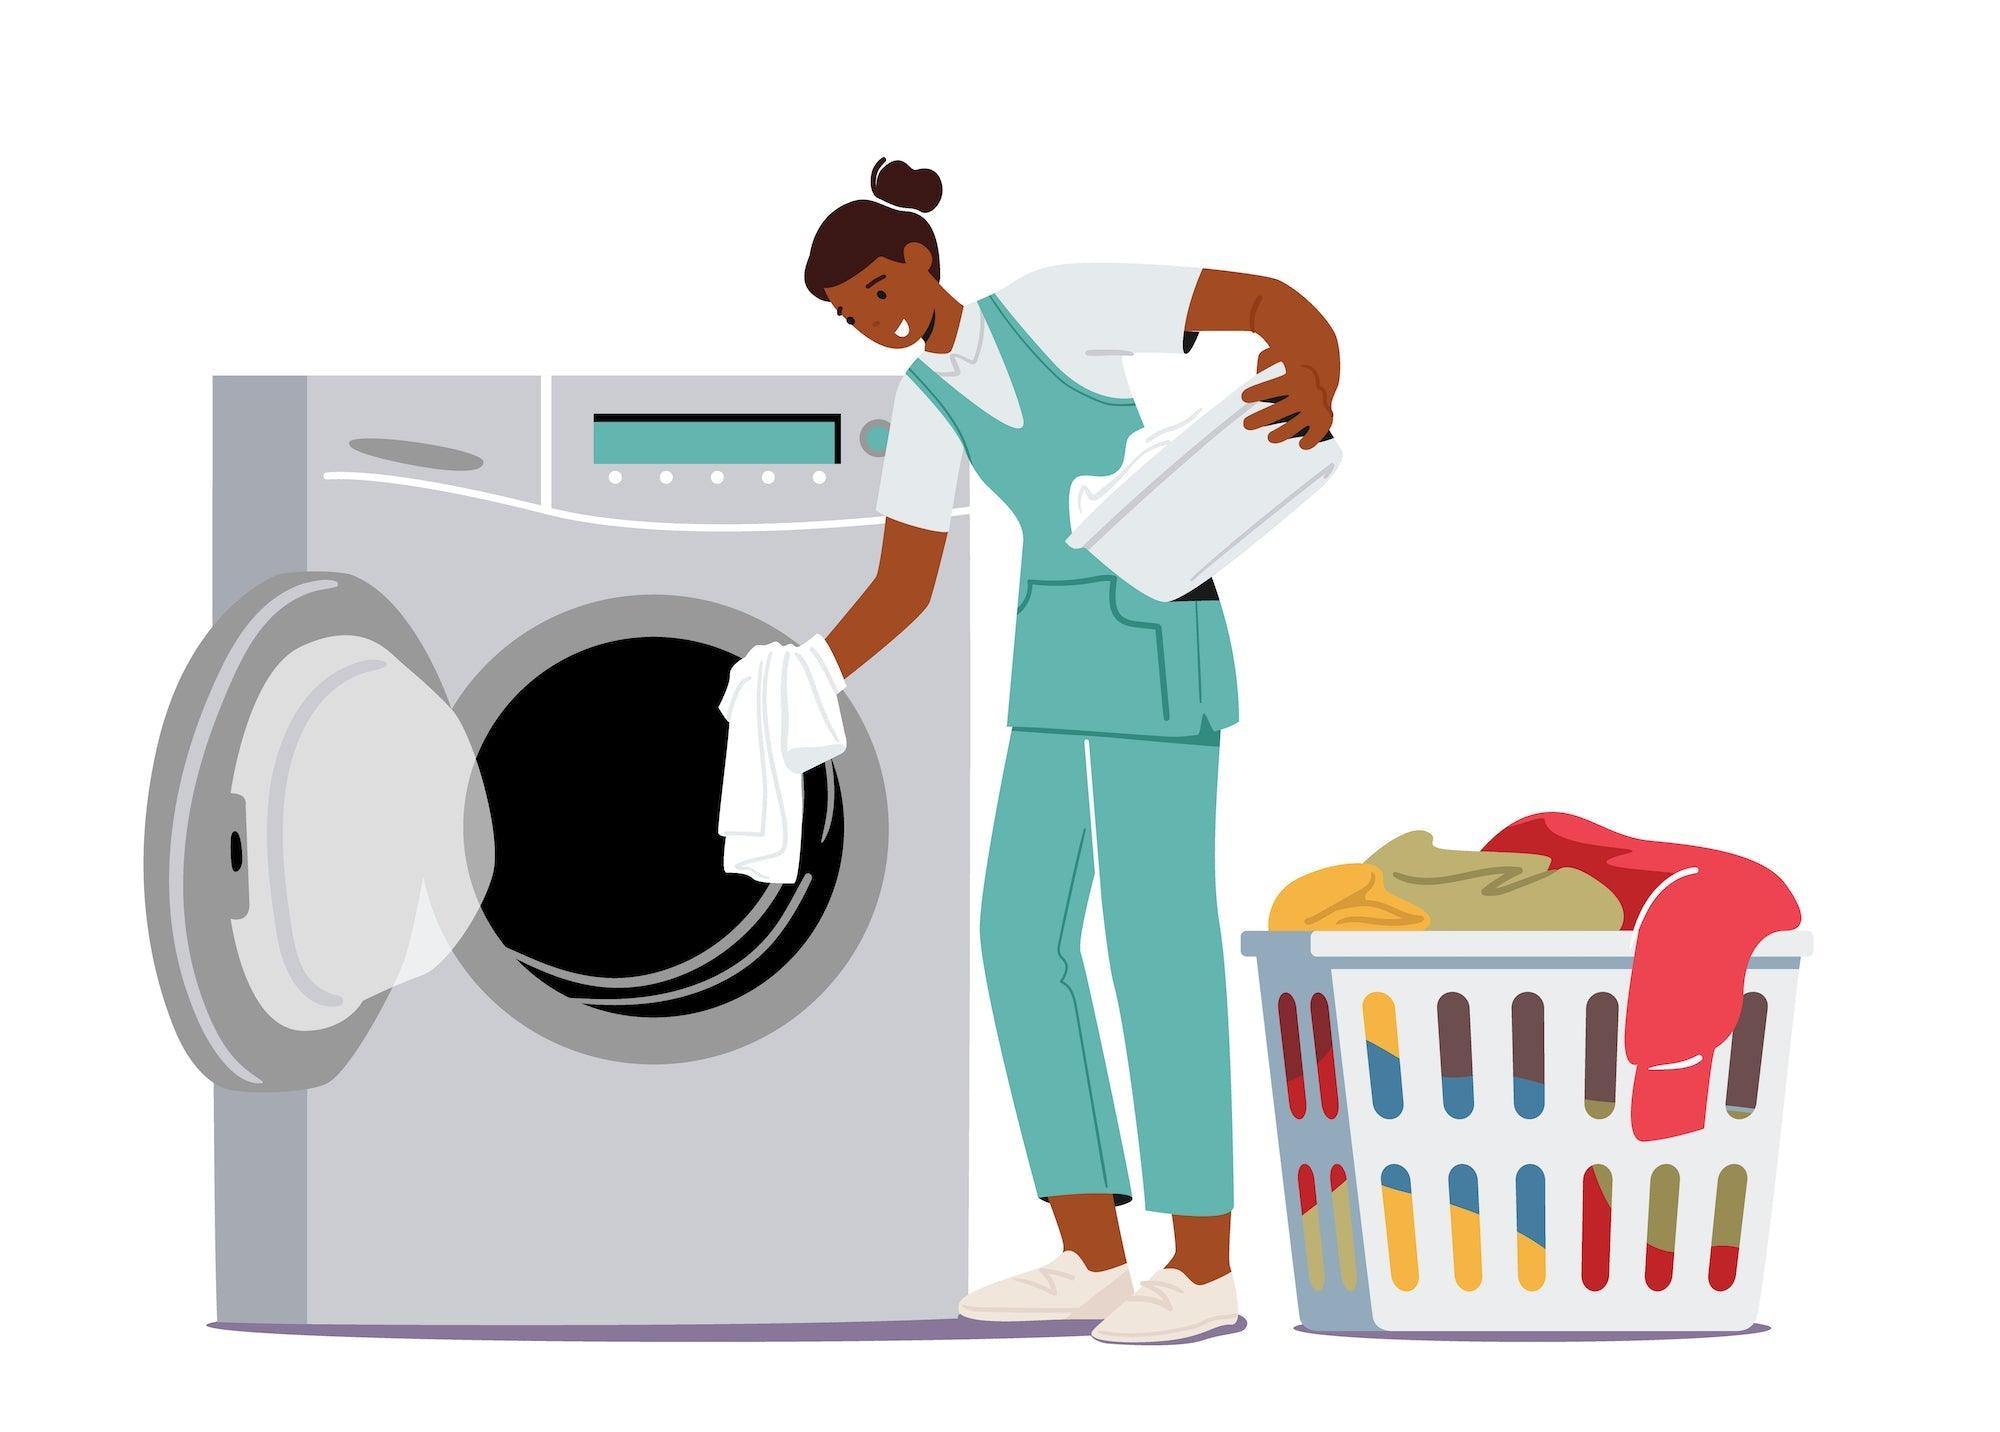 How to Clean a Washing Machine: A Step-by-Step Guide